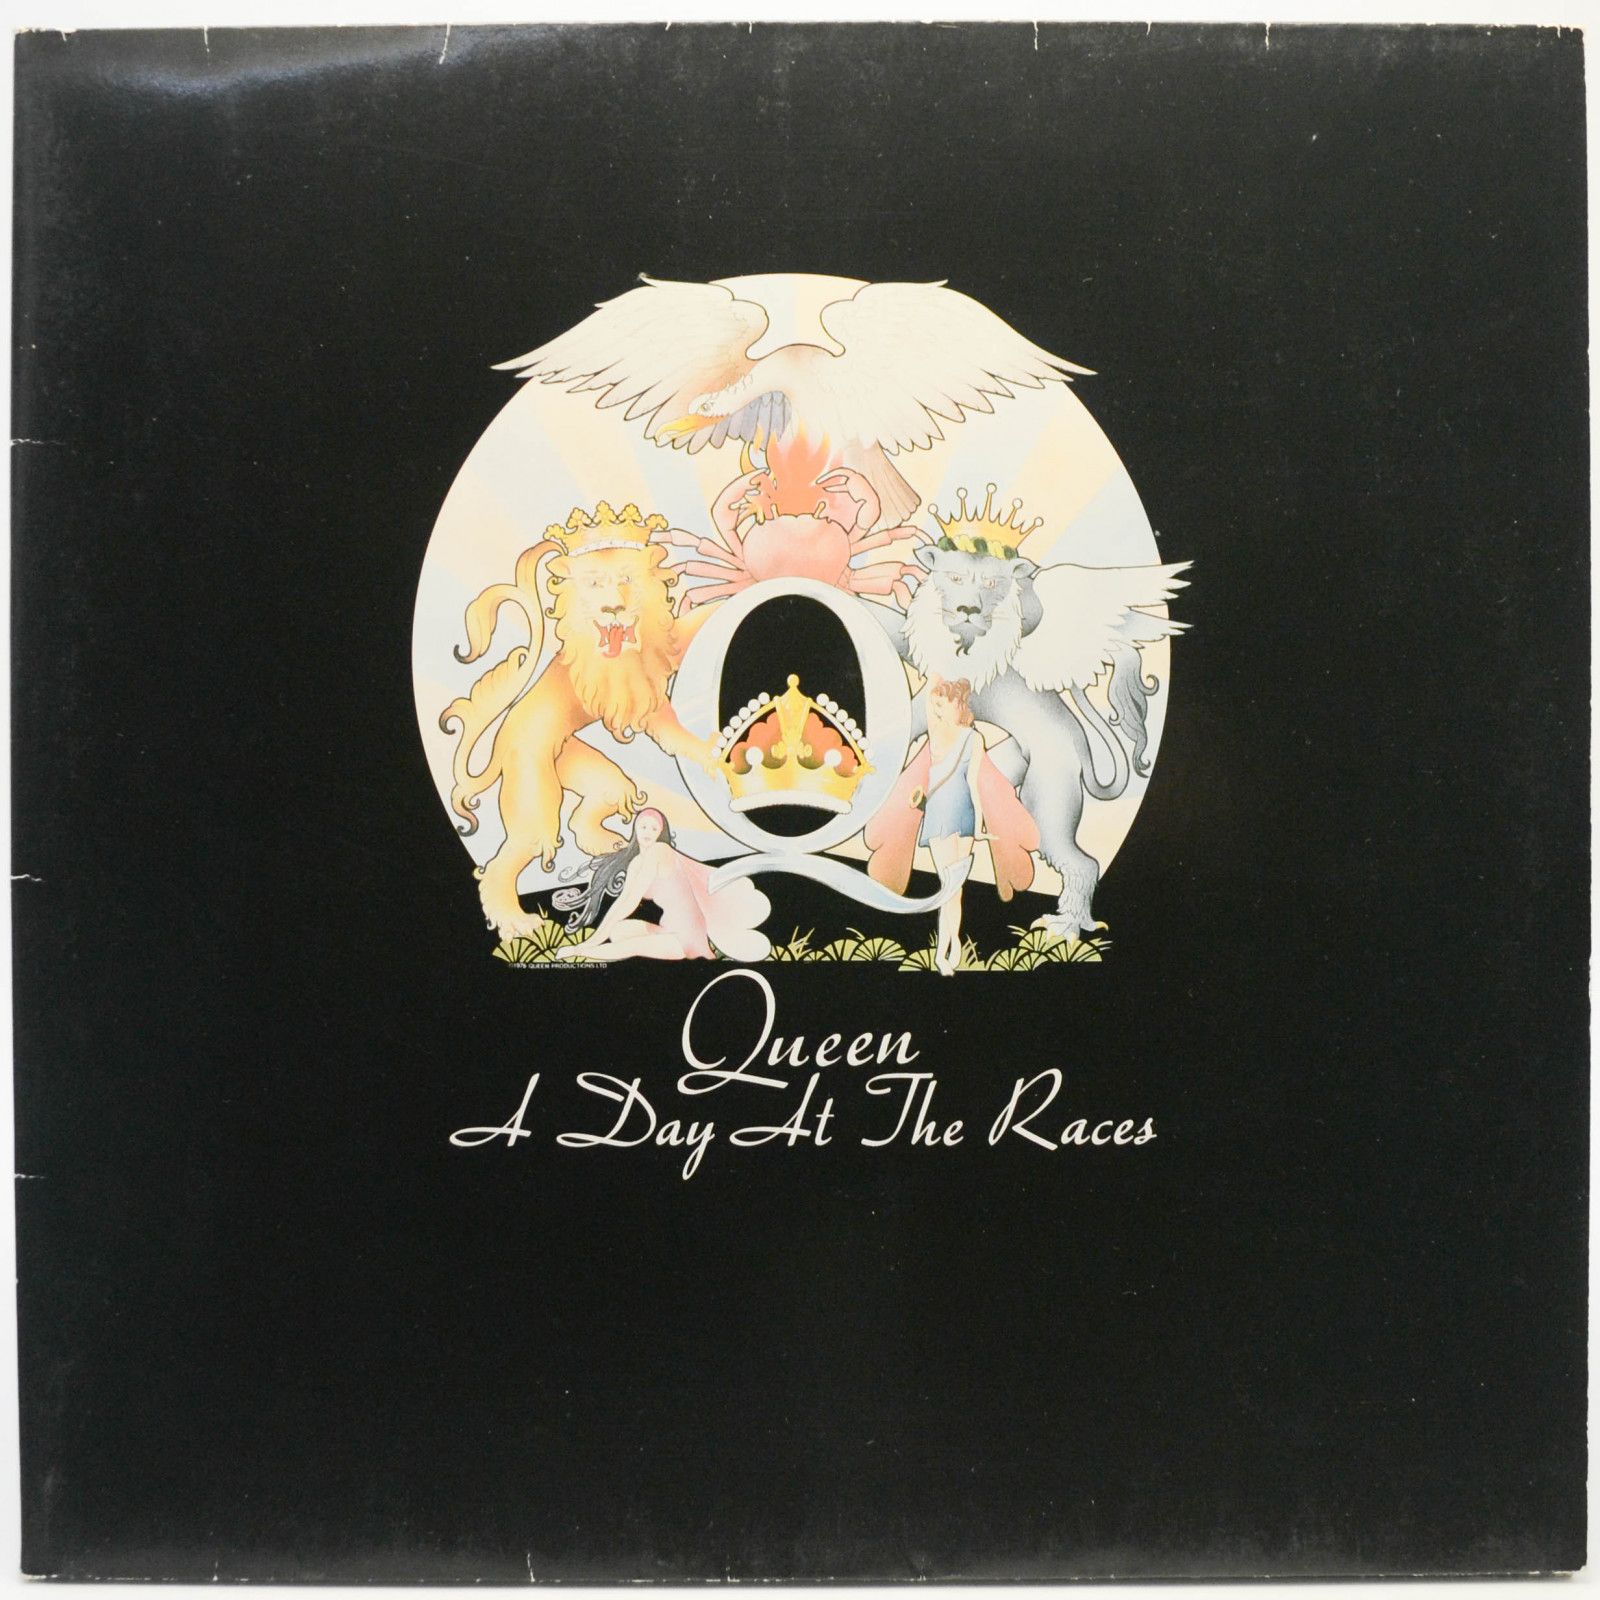 Queen — A Day At The Races, 1976